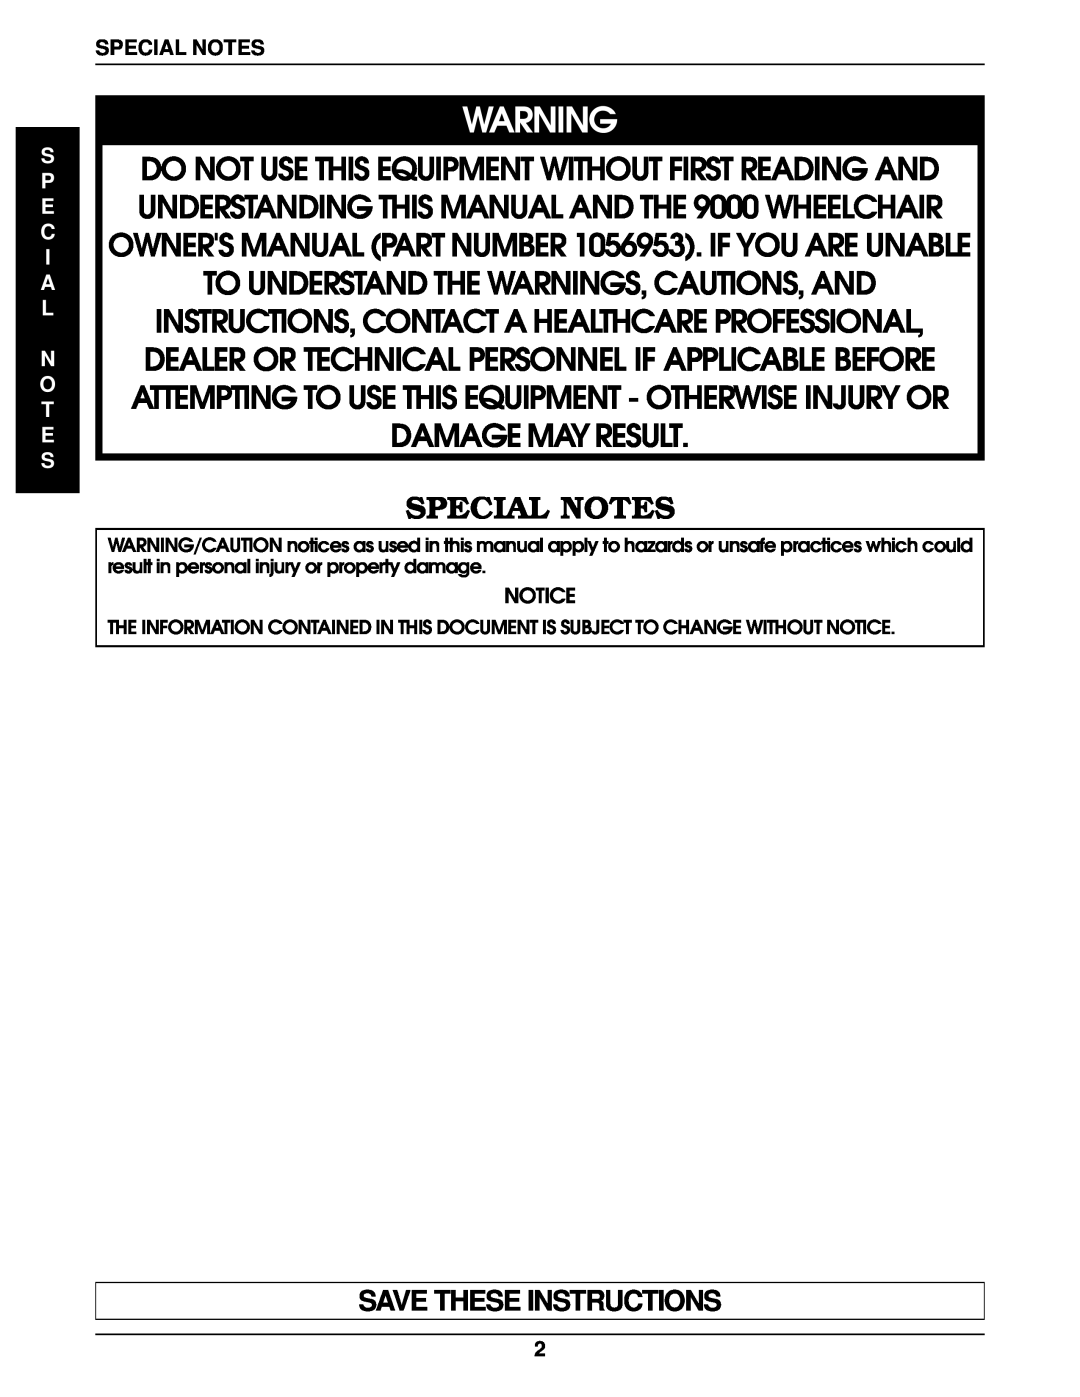 Invacare 9000 Wheelchairs manual Special Notes, Save These Instructions 